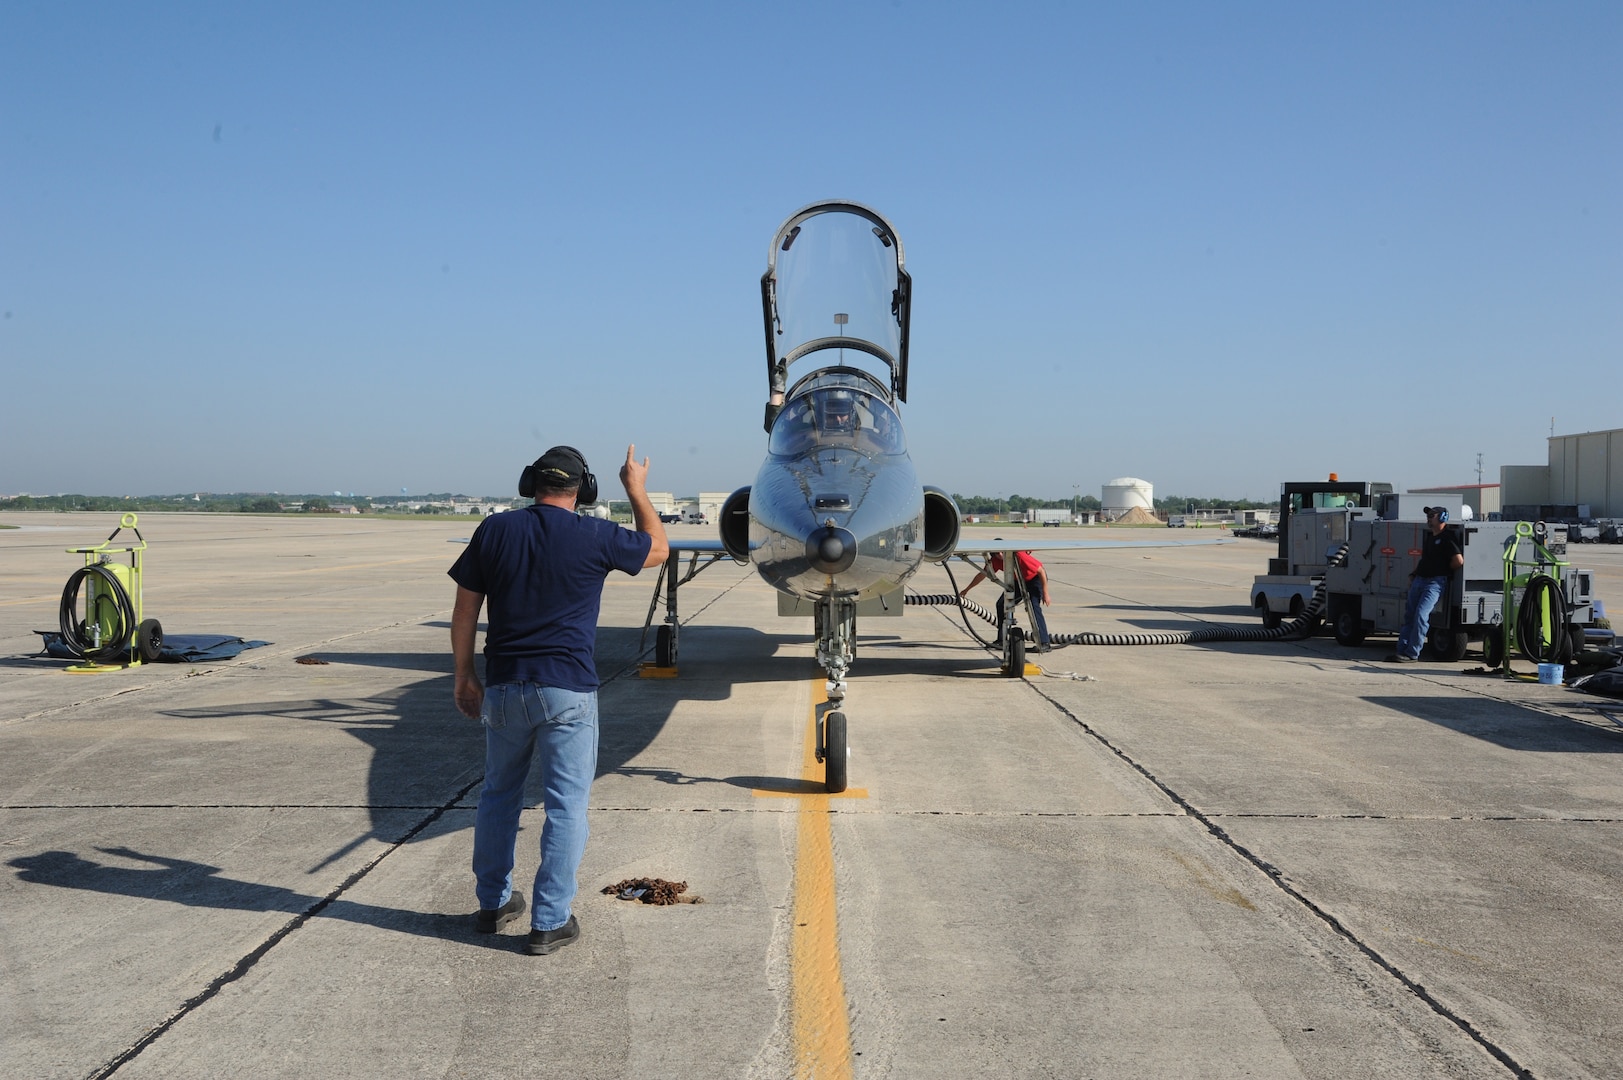 Keith Barnes (left), 571st Aircraft Maintenance Squadron contractor, performs final checks to the T-38 Talon prior to Lt. Col. Ripley Woodard, 415th Flight Test Flight commander, taking off from Joint Base San Antonio-Randolph, Texas May 17. The T-38 is being returned to Sheppard Air Force Base, Texas, after being modified by the 571st here. (U.S. Air Force photo by Rich McFadden) 